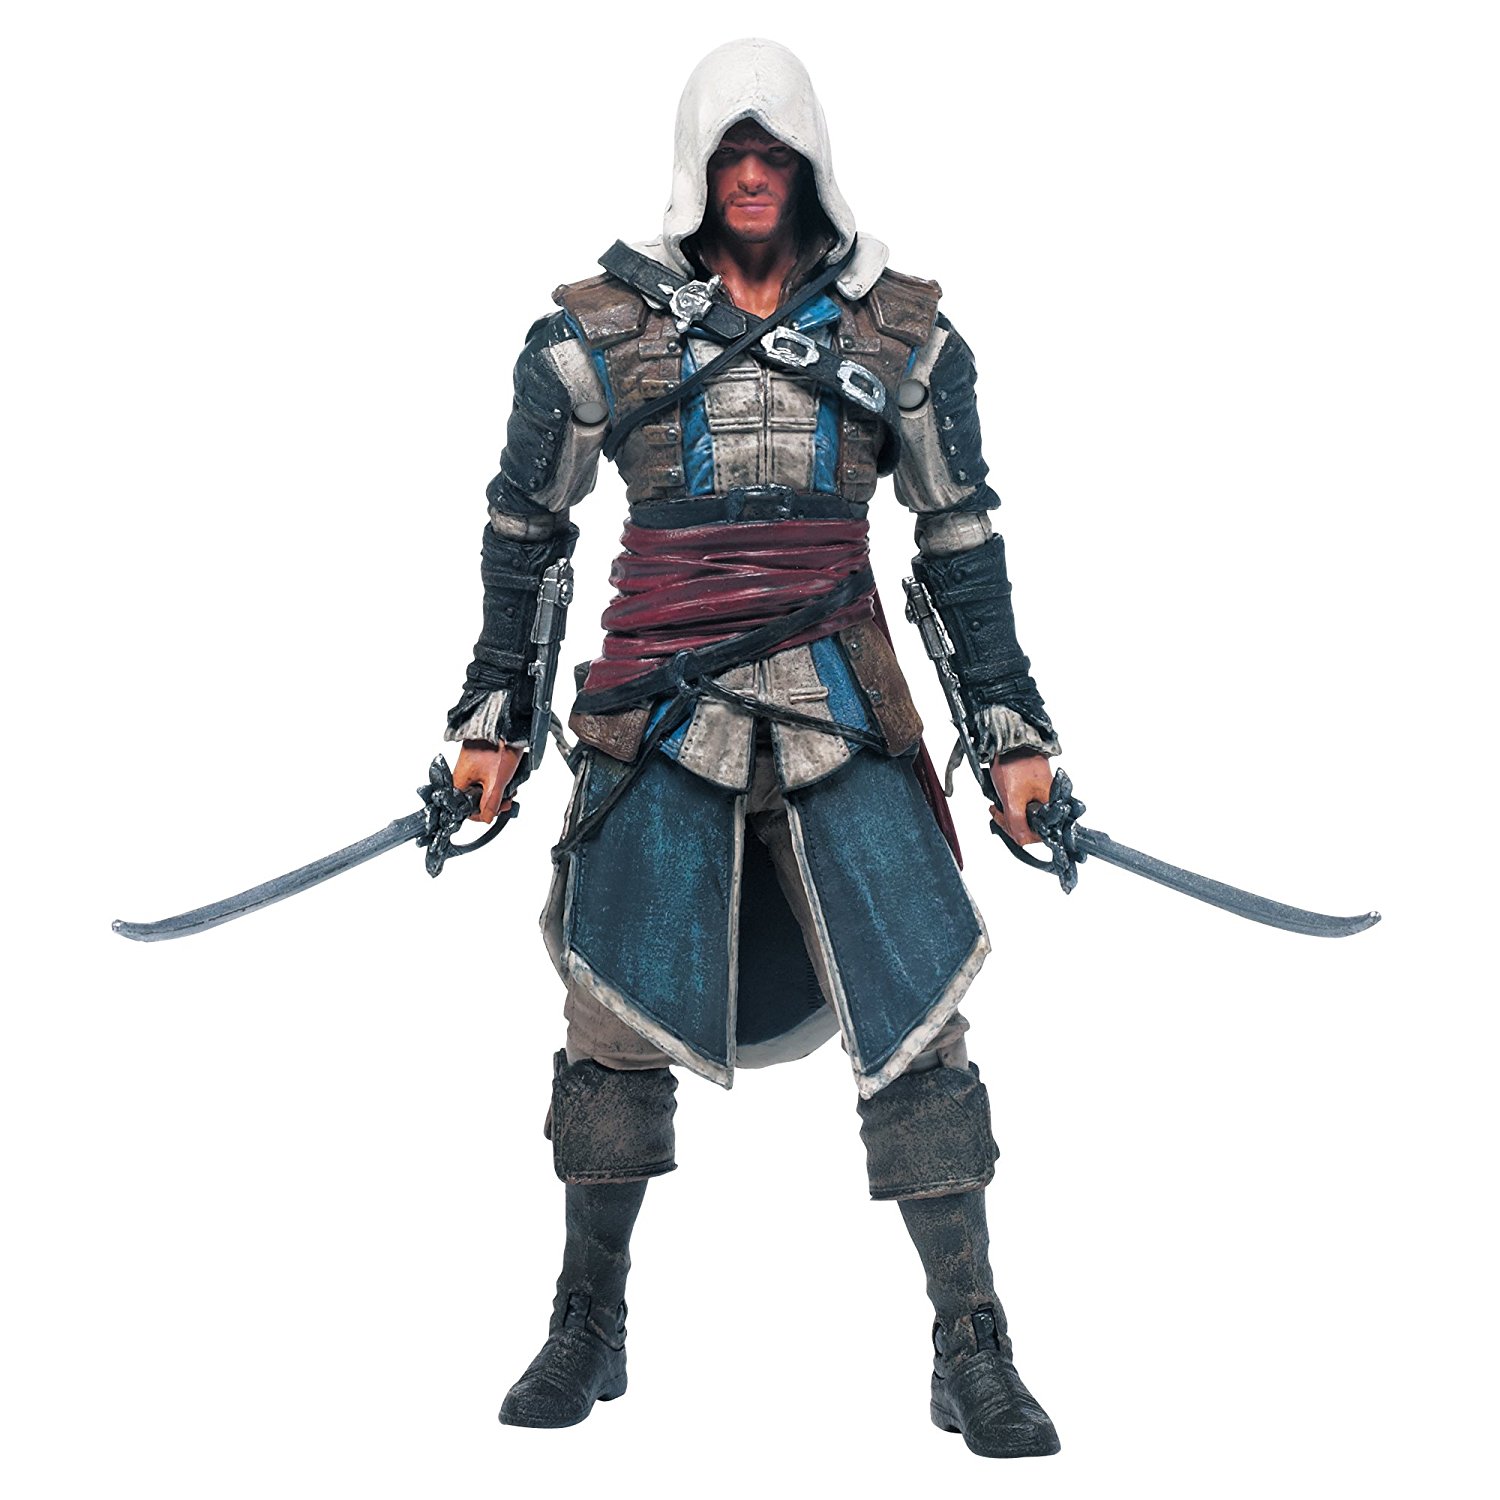 Assassin's Creed Series 1 Edward Kenway Action Figure